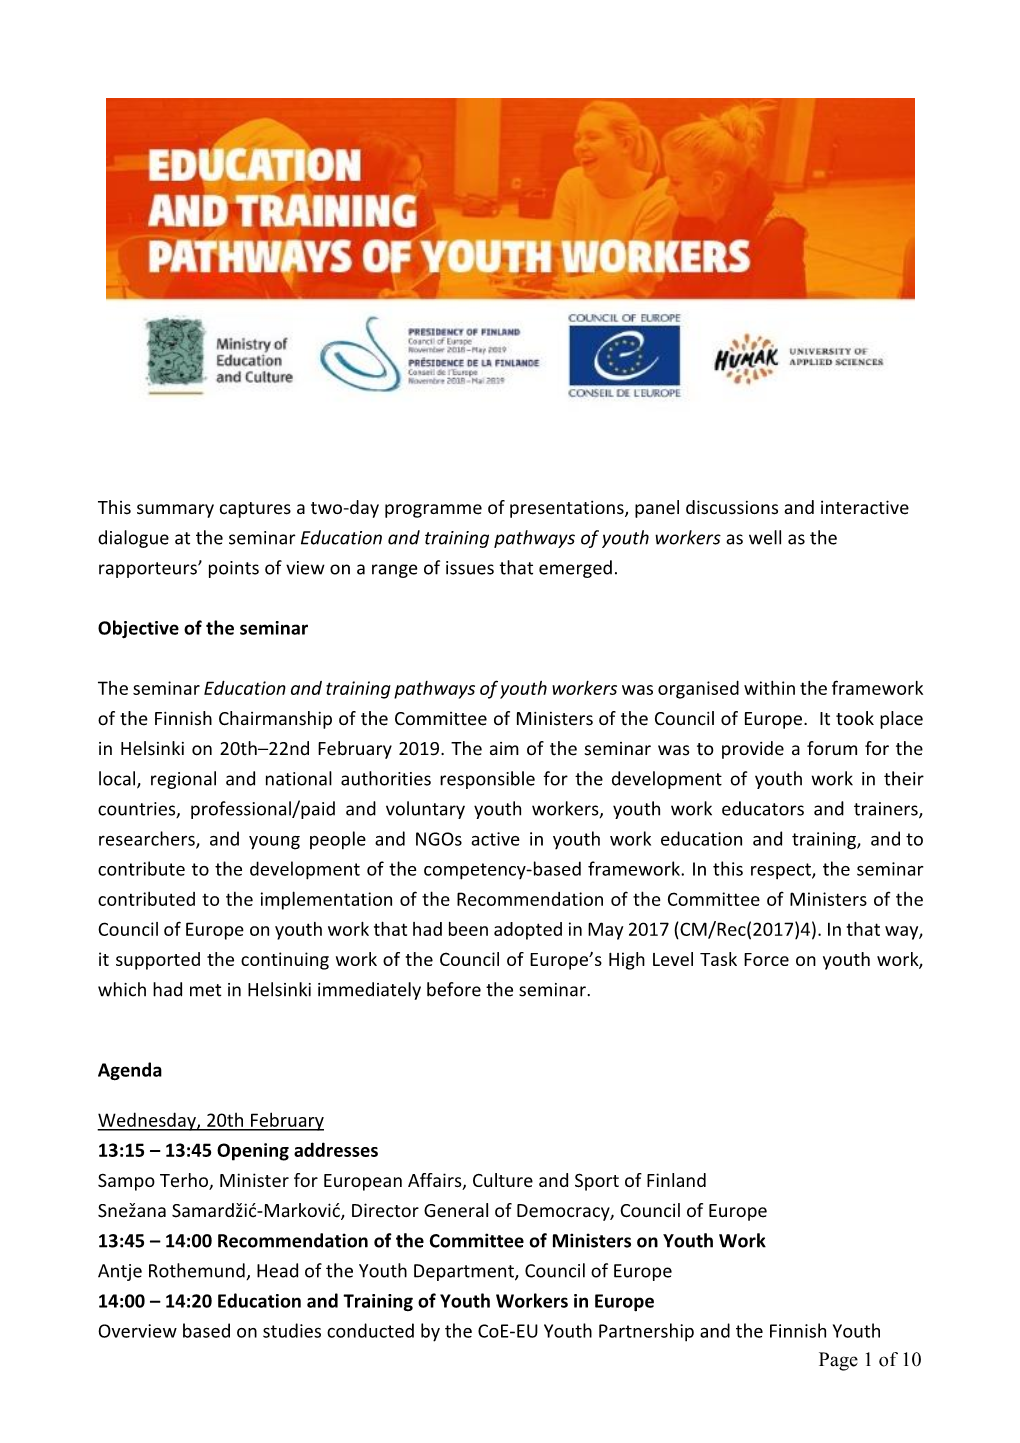 Report: Education and Training of Youth Workers in Helsinki